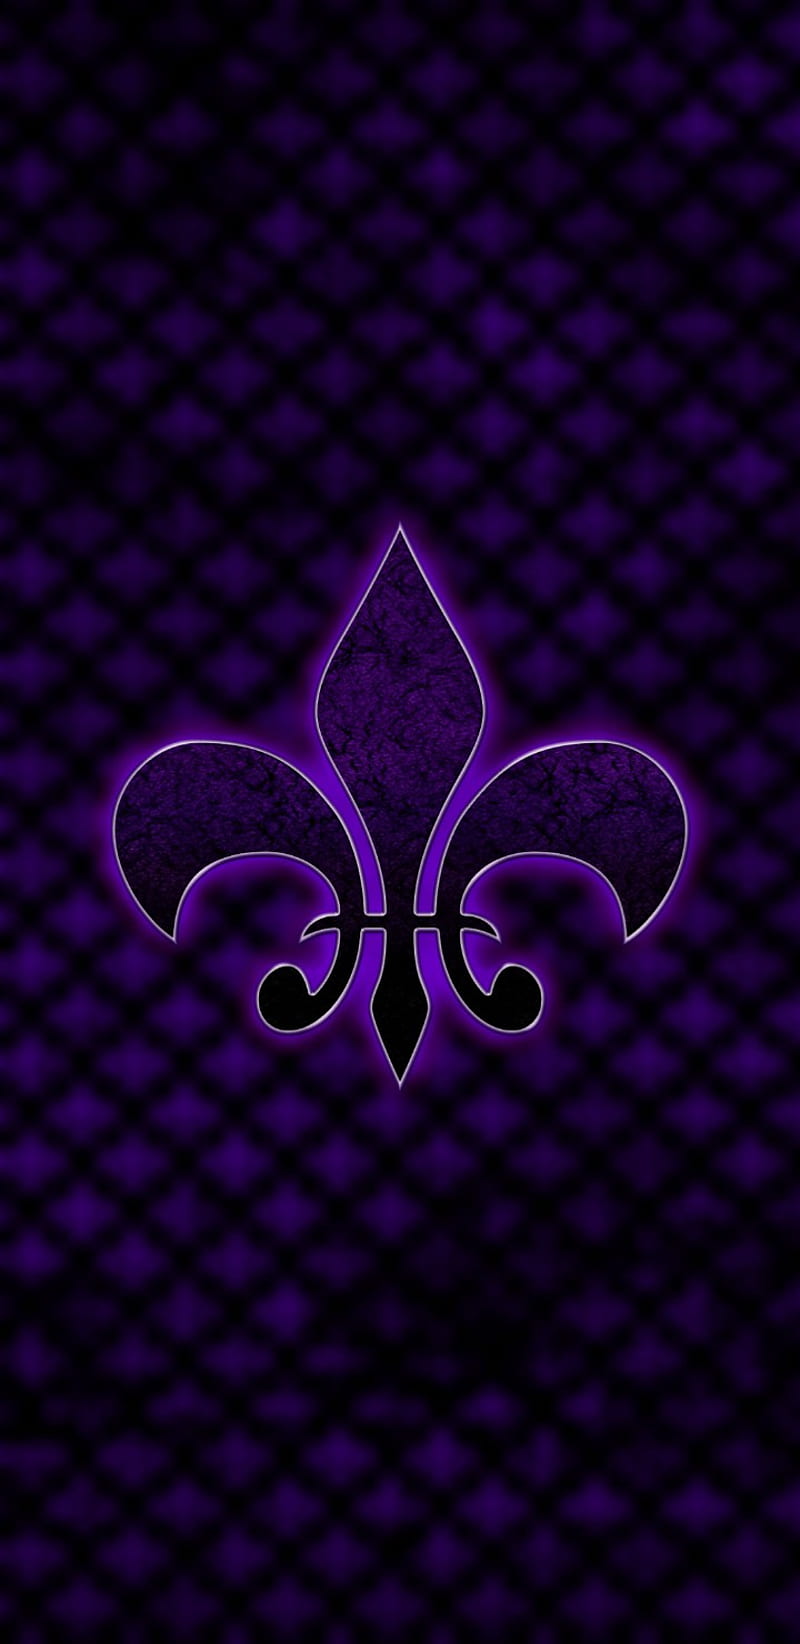 130 Saints Row HD Wallpapers and Backgrounds